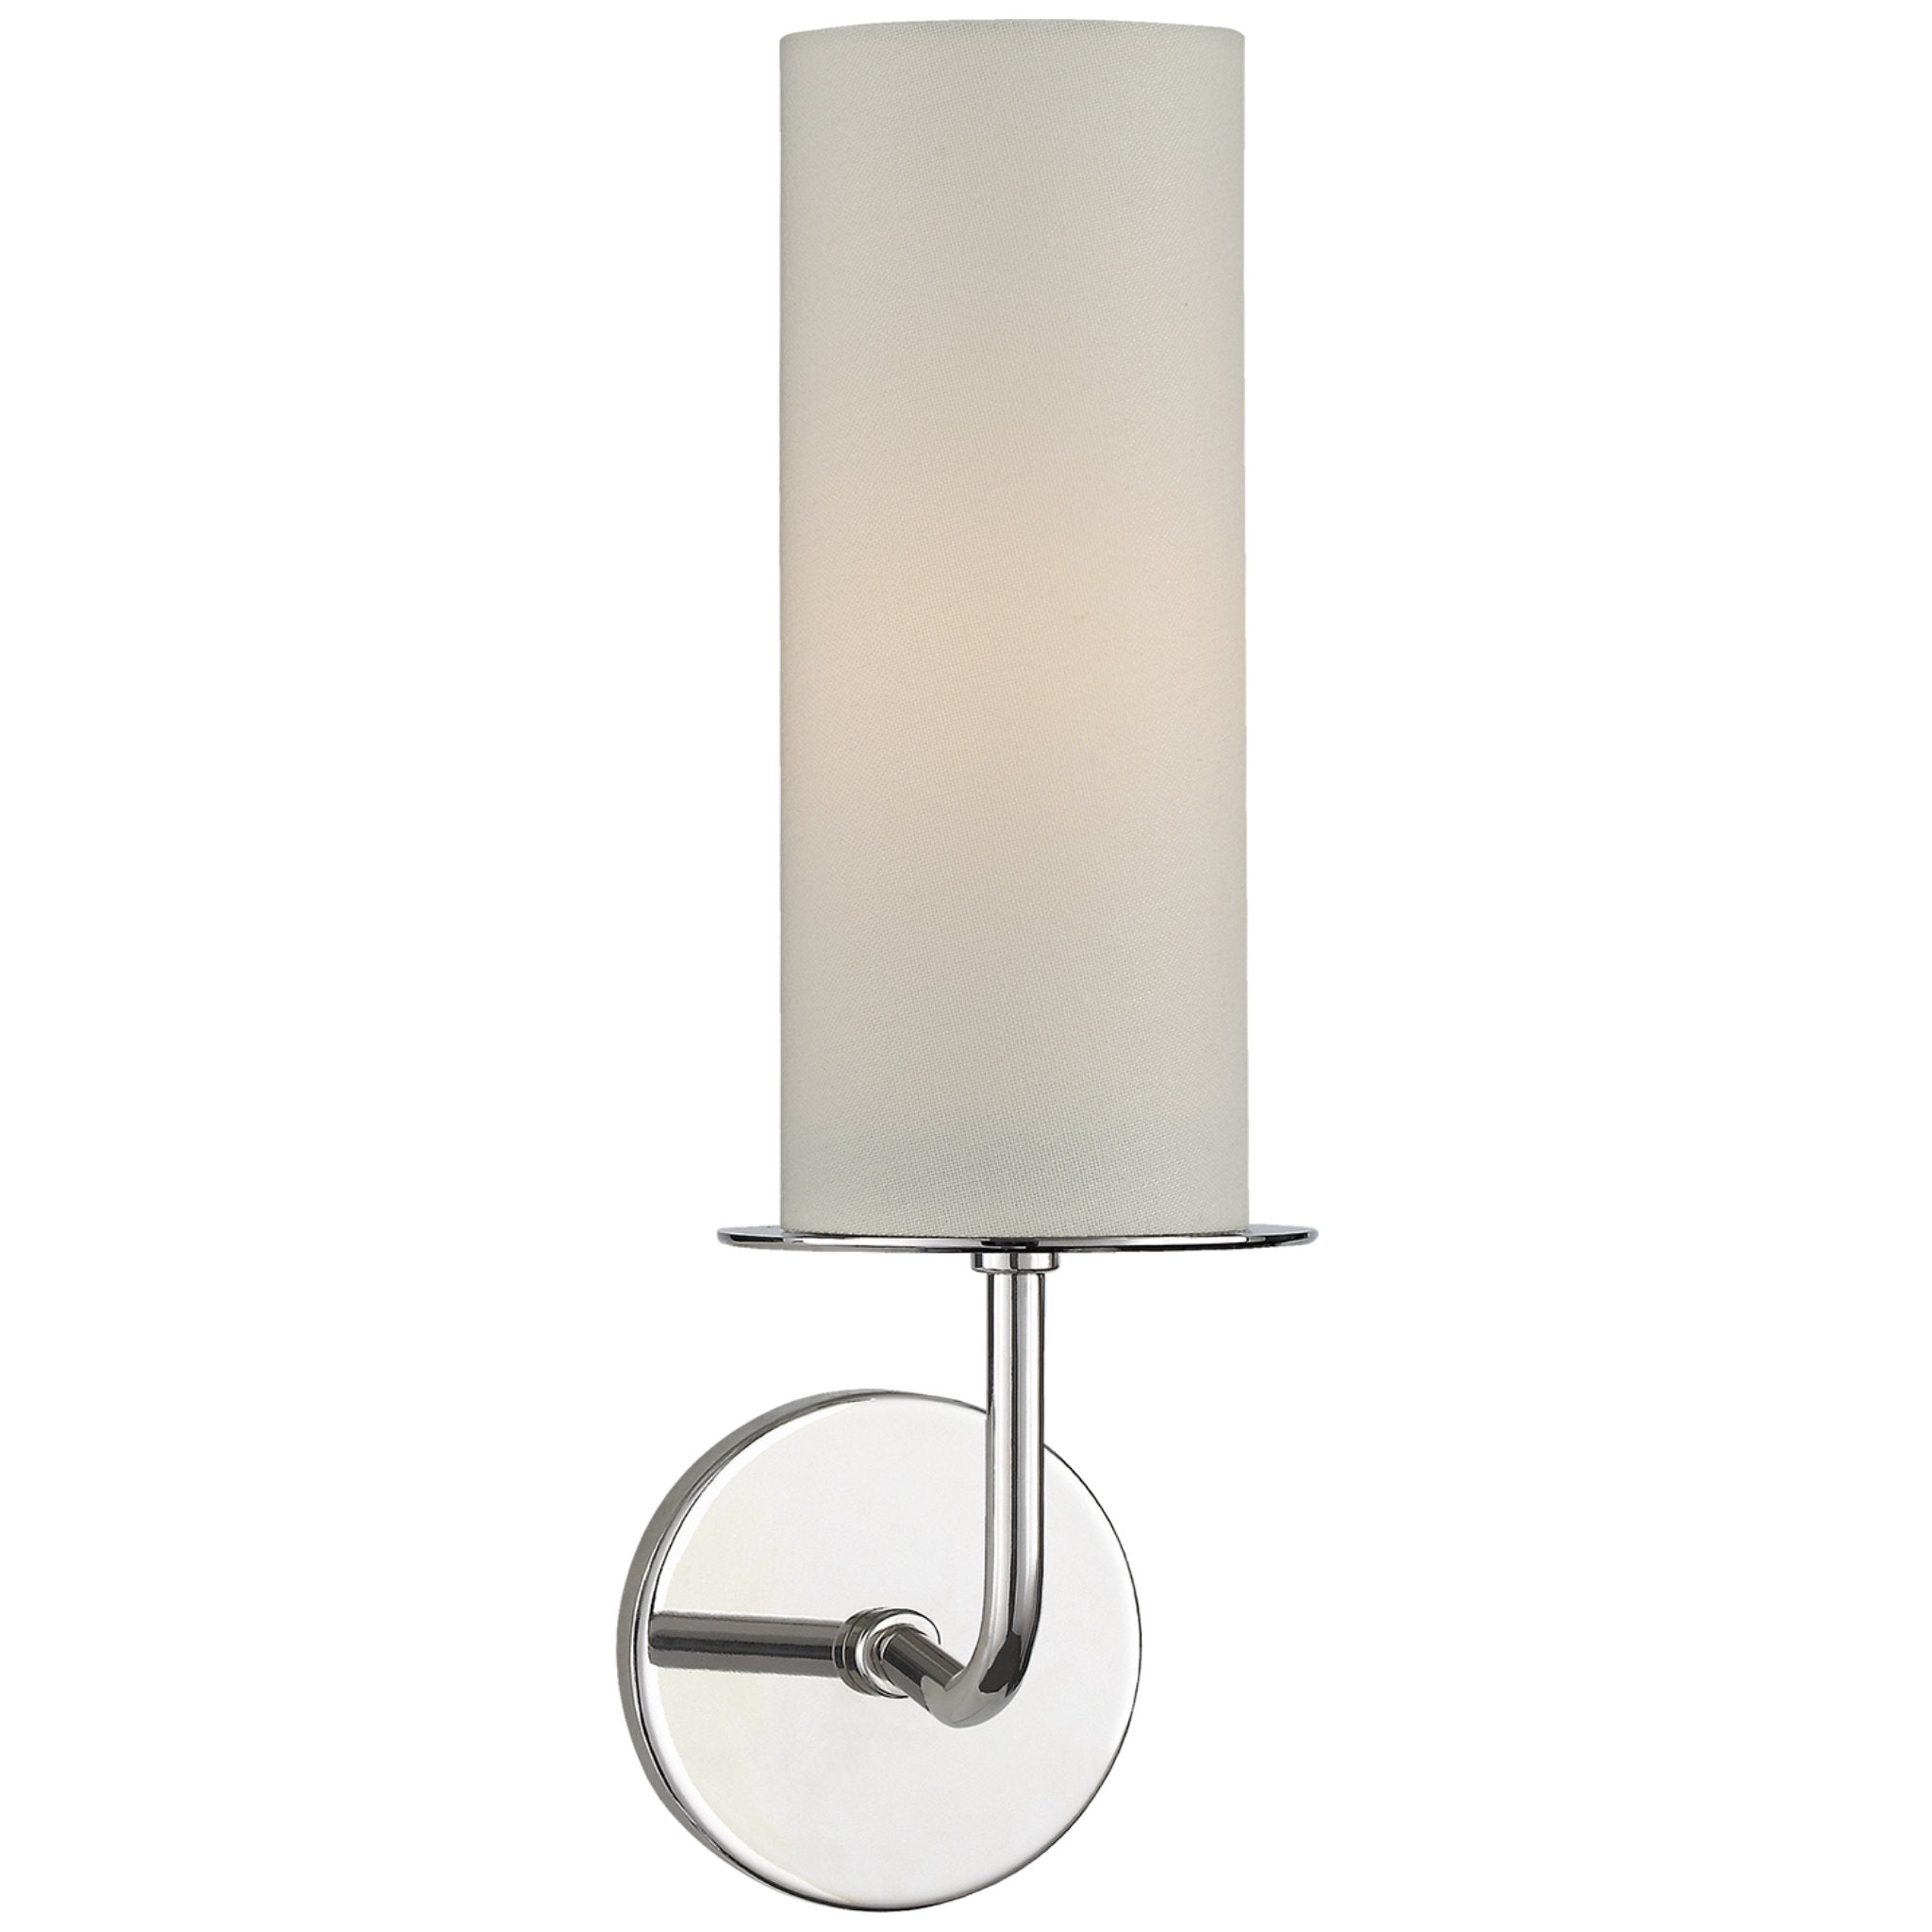 kate spade new york Larabee Single Sconce in Polished Nickel with Cream Linen Shade